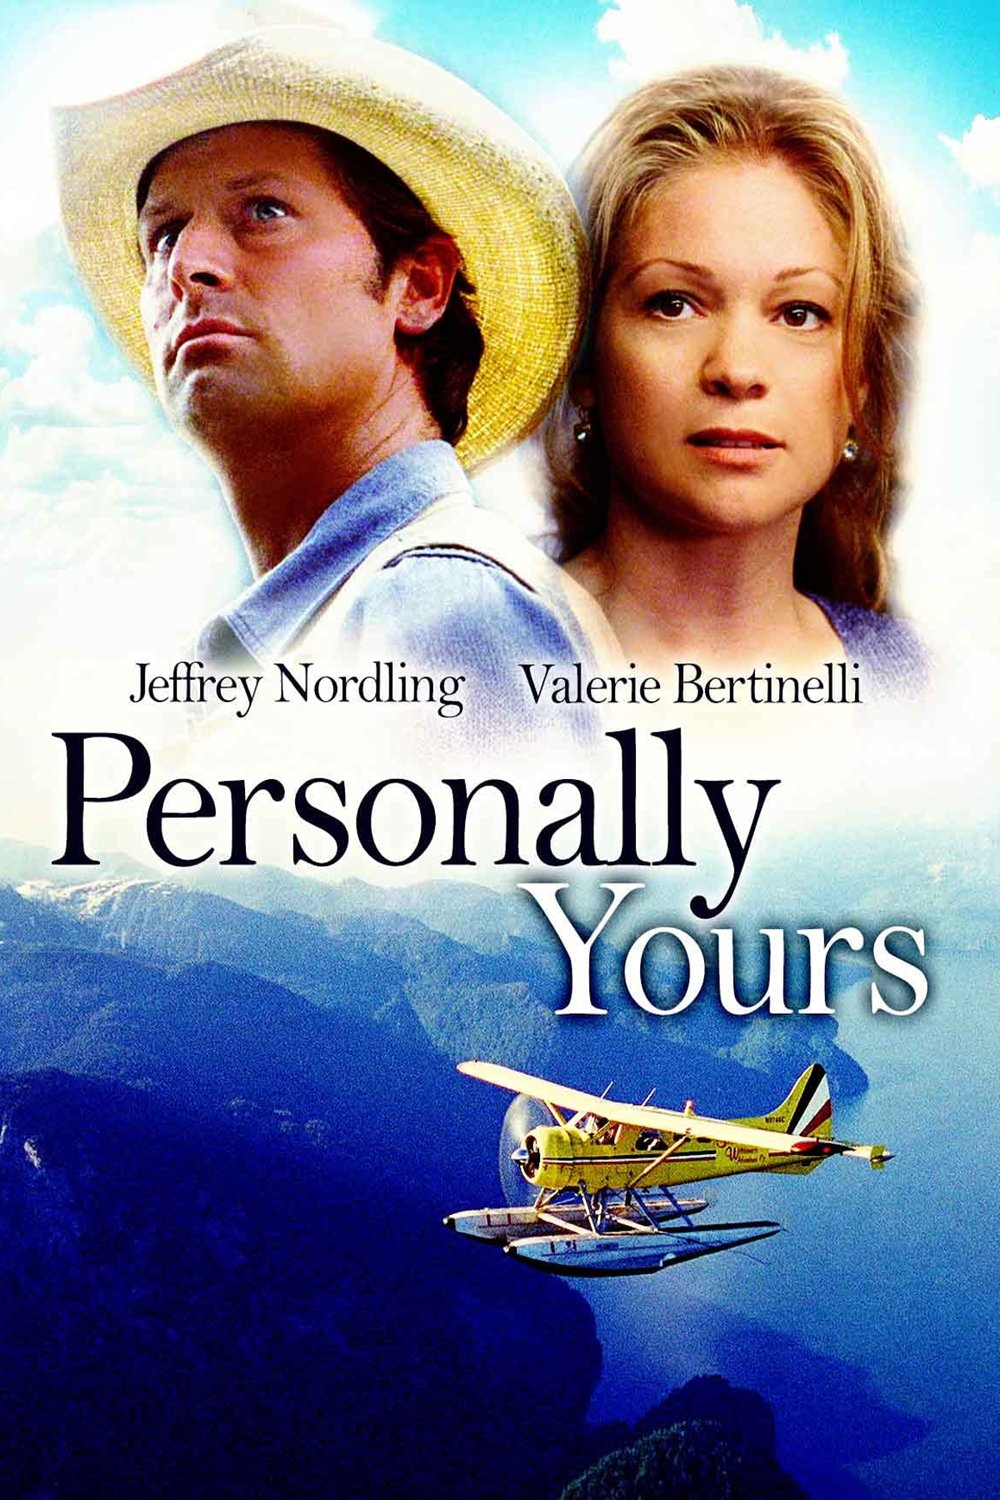 Poster of the movie Personally Yours